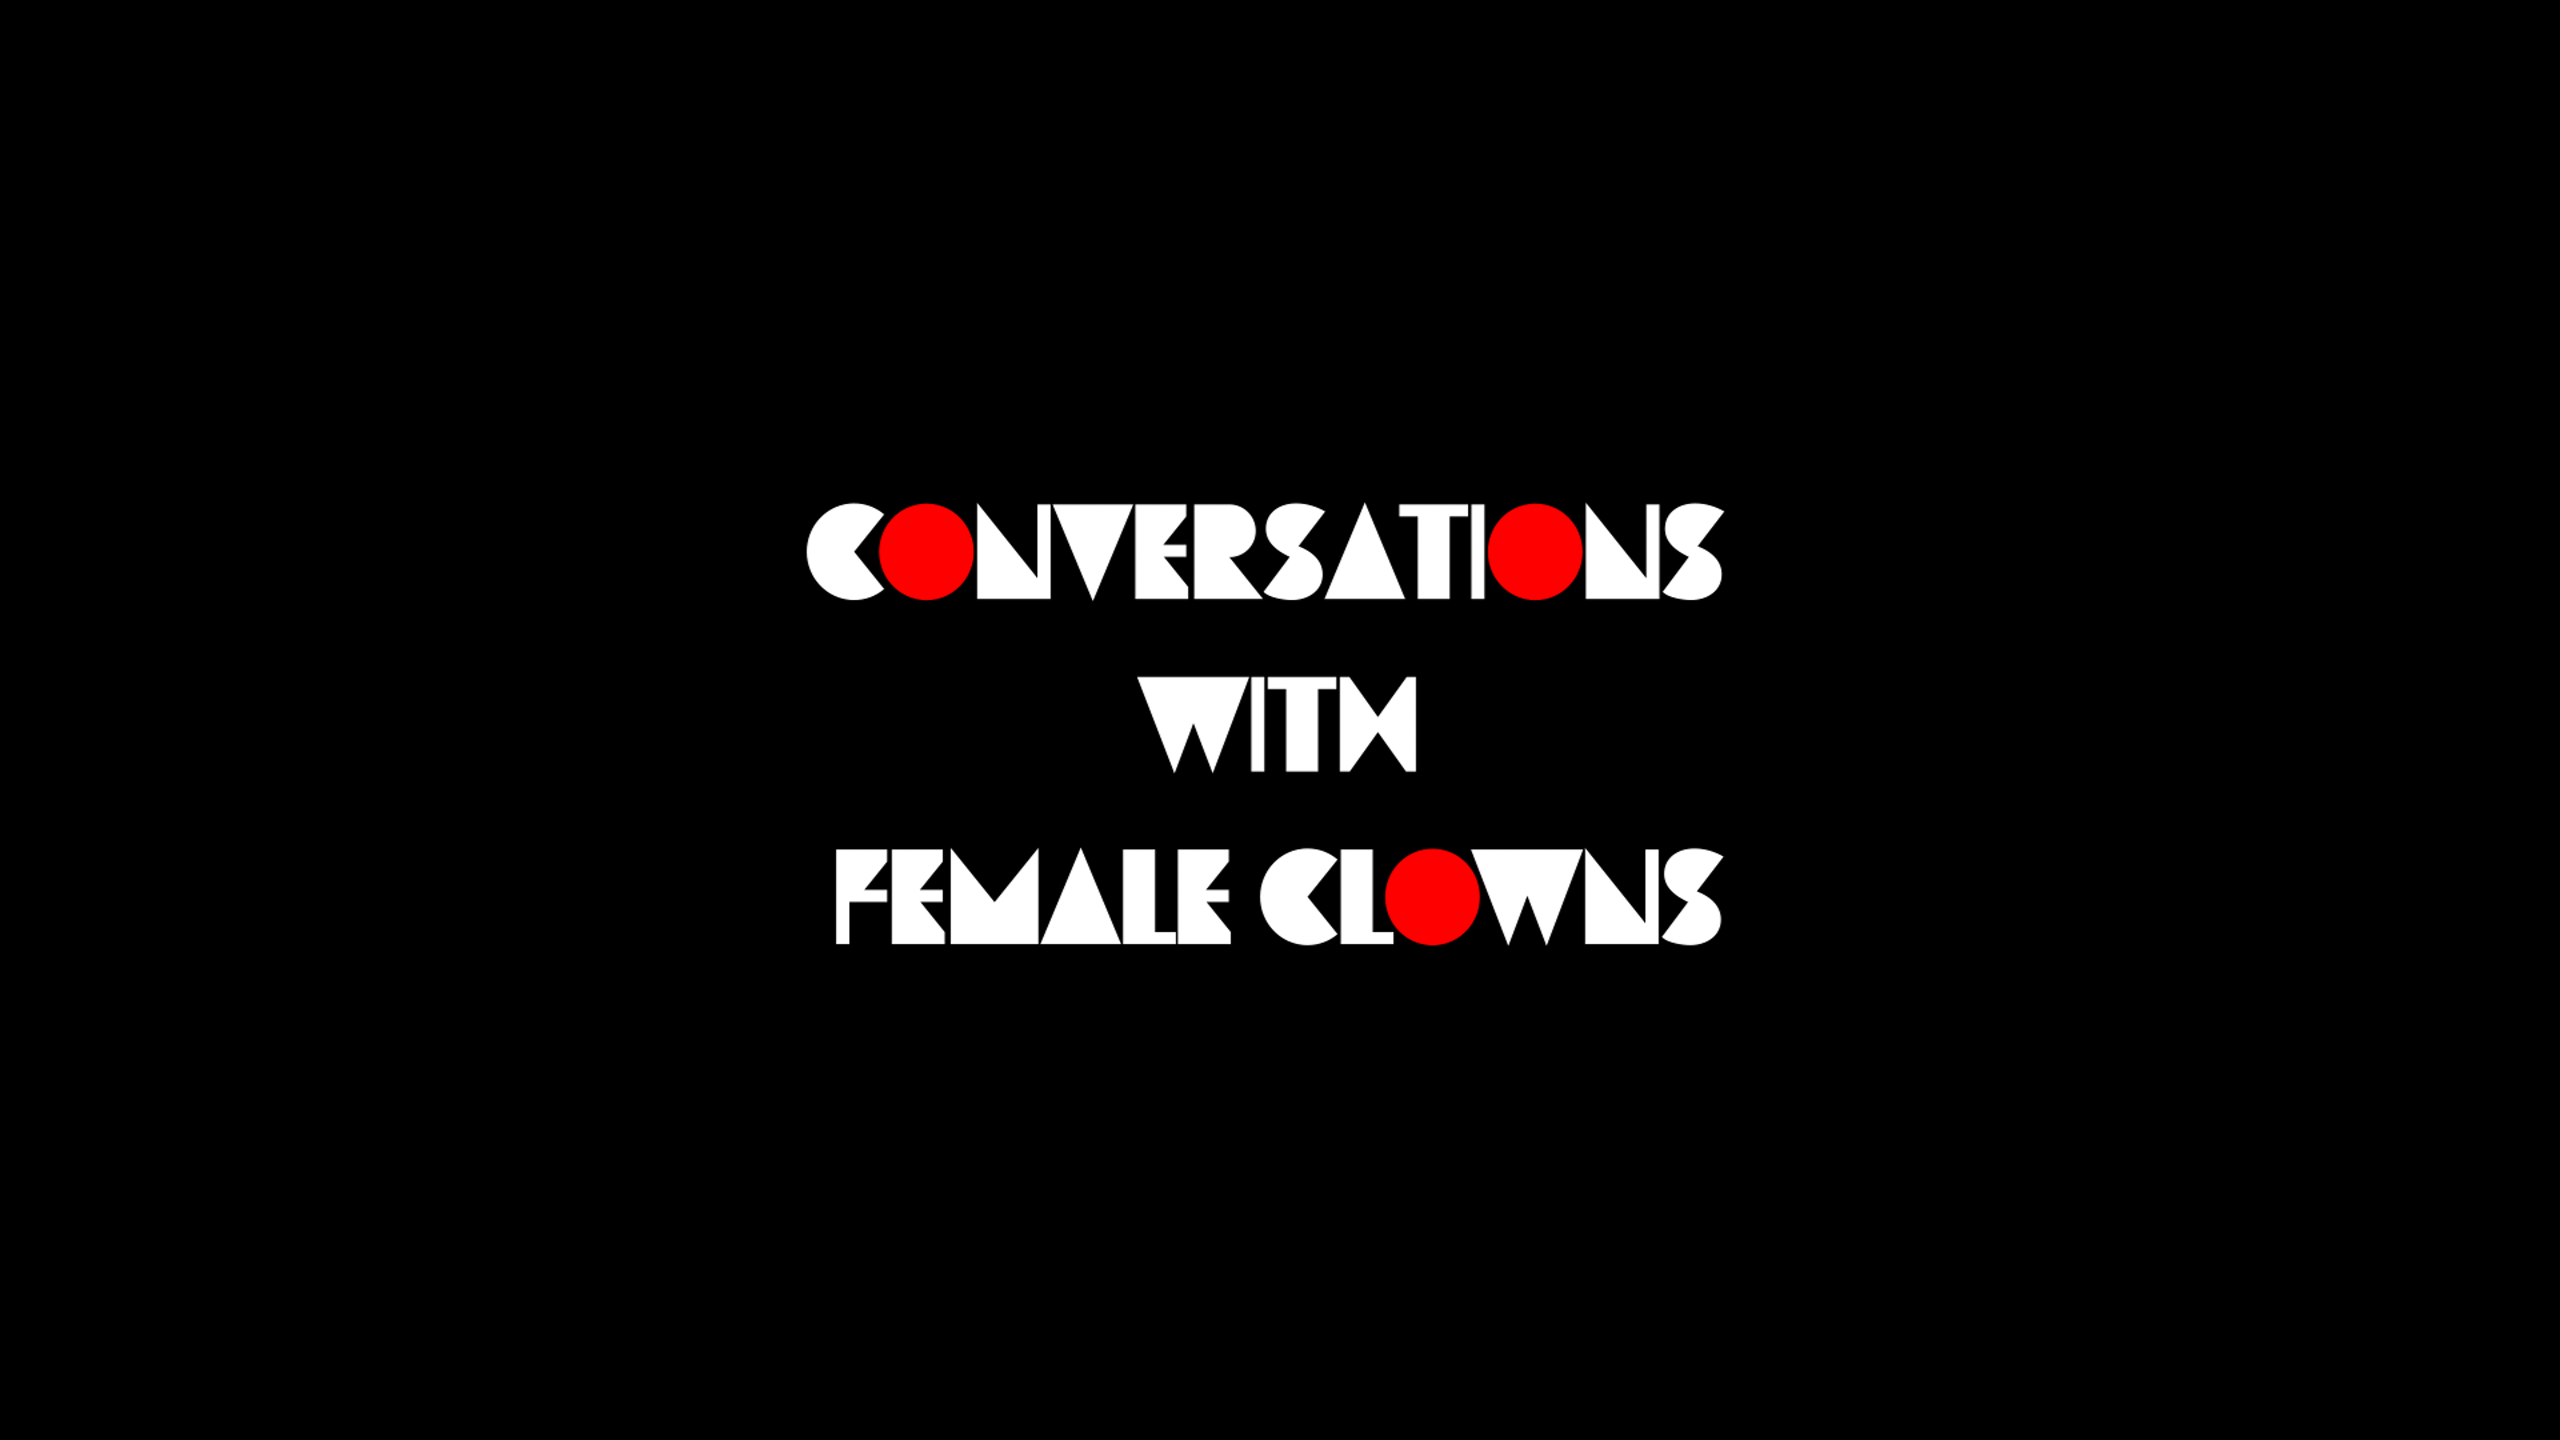 Conversations with Female Clowns